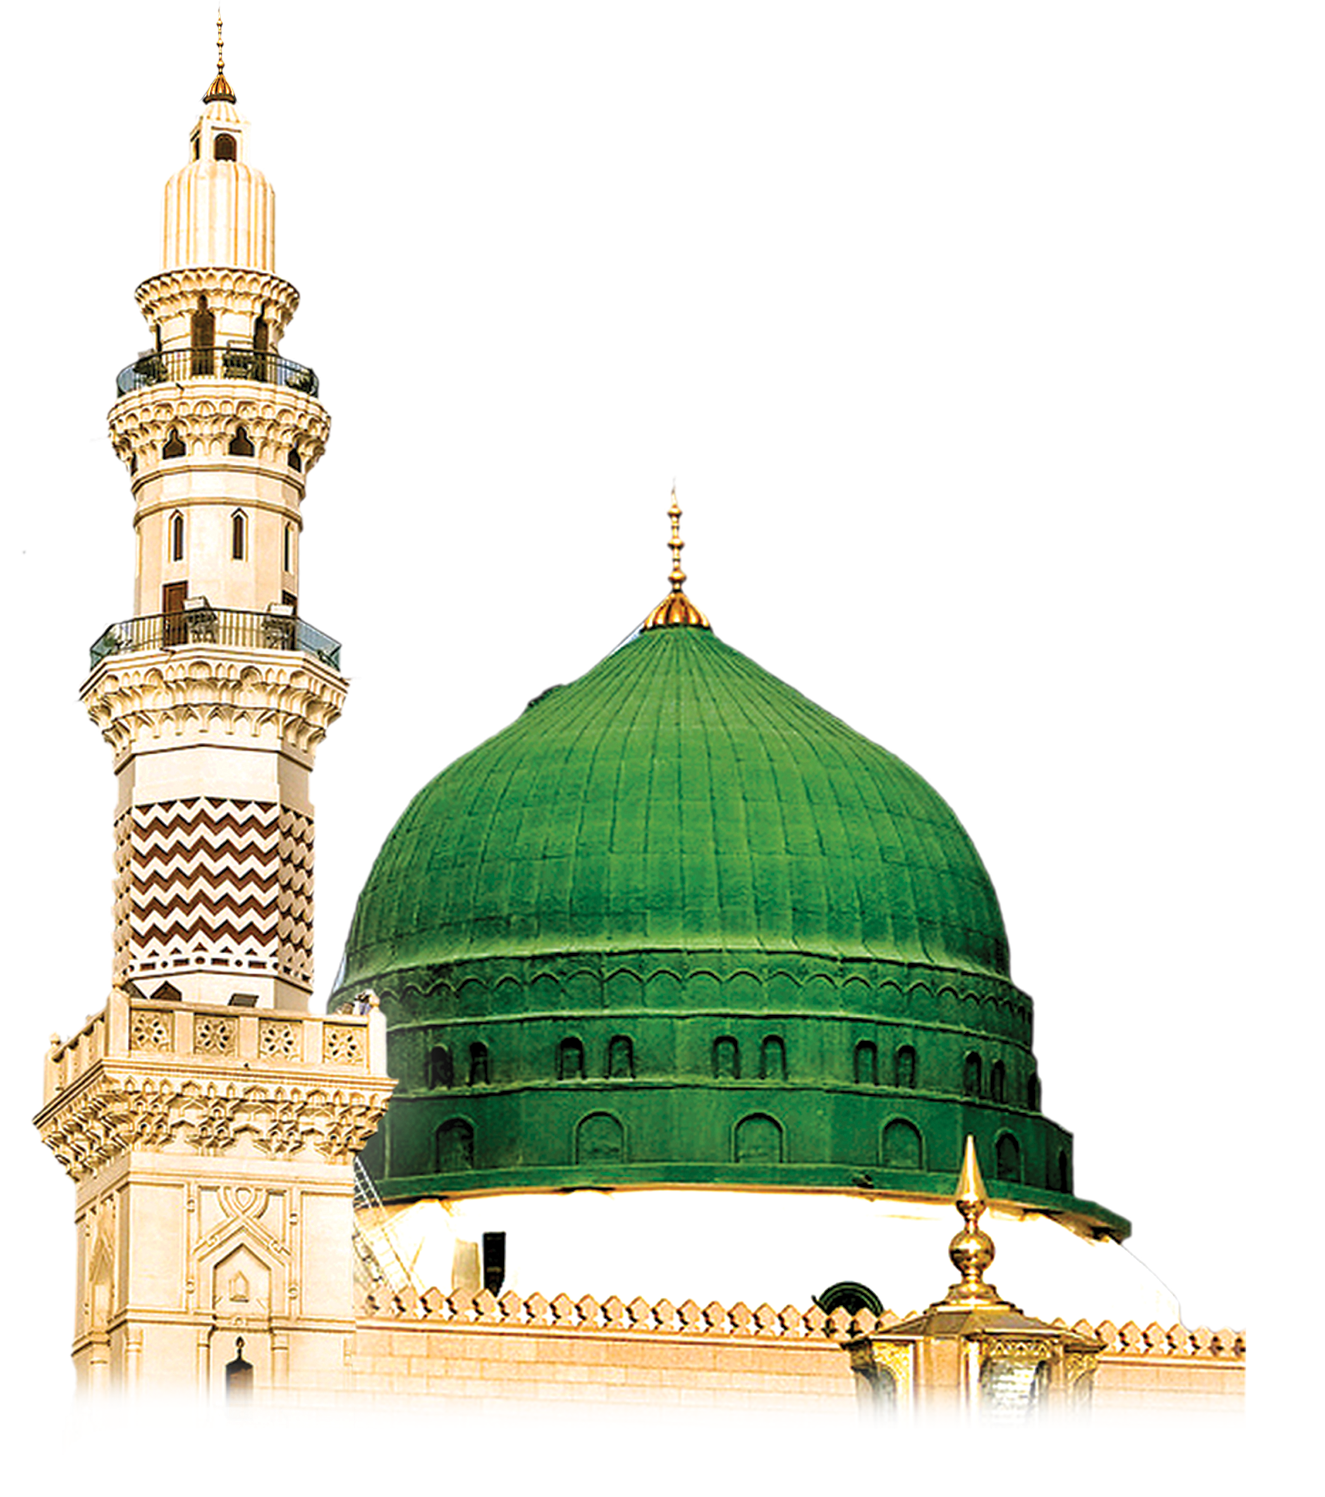  masjid  e nabvi clipart  10 free Cliparts  Download images 